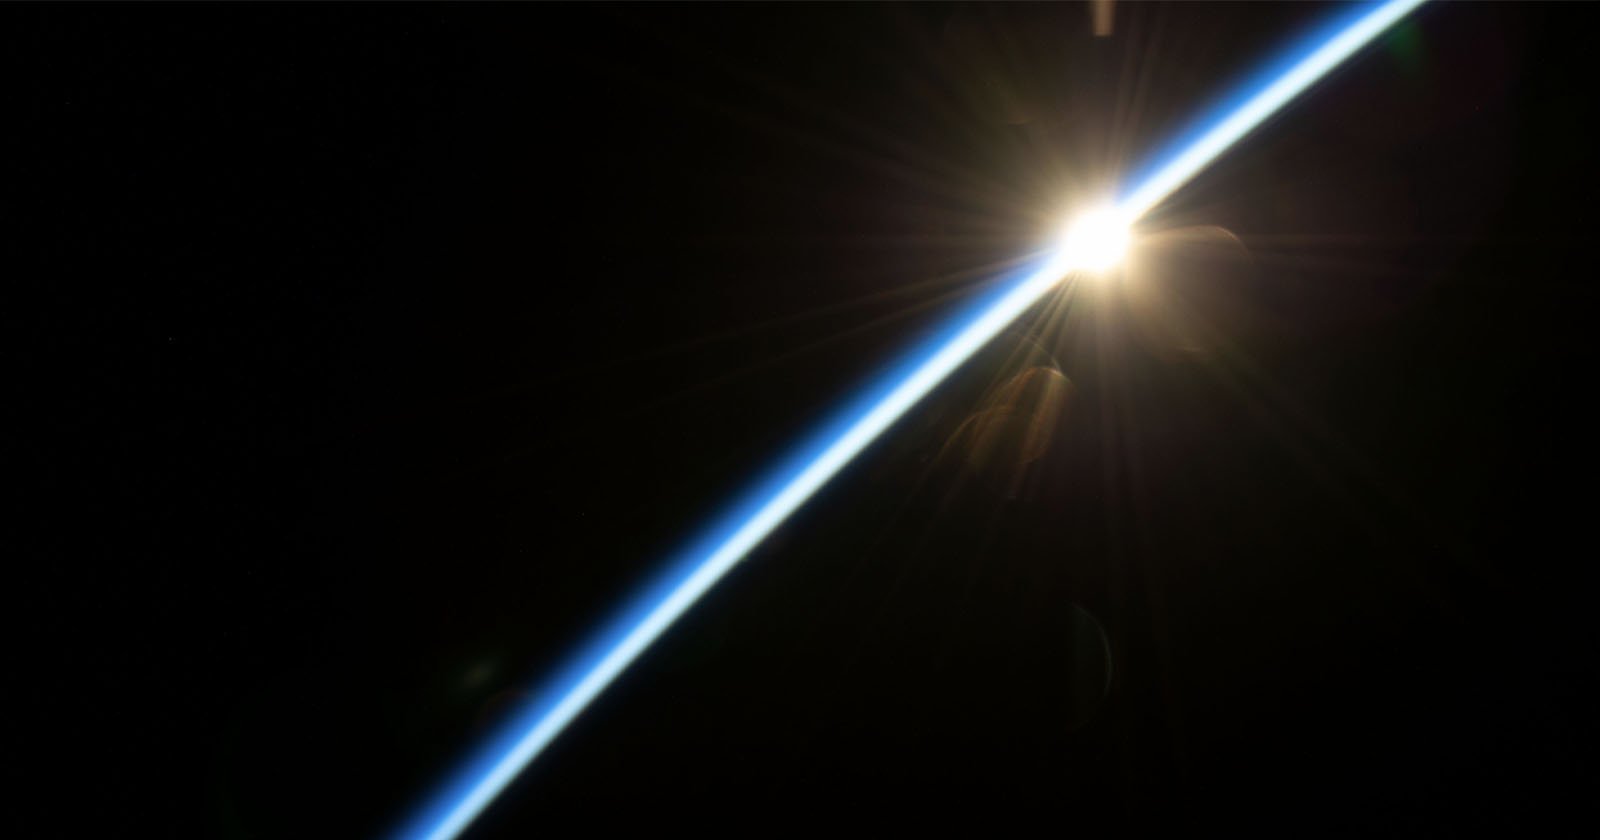 the sunrises from space station